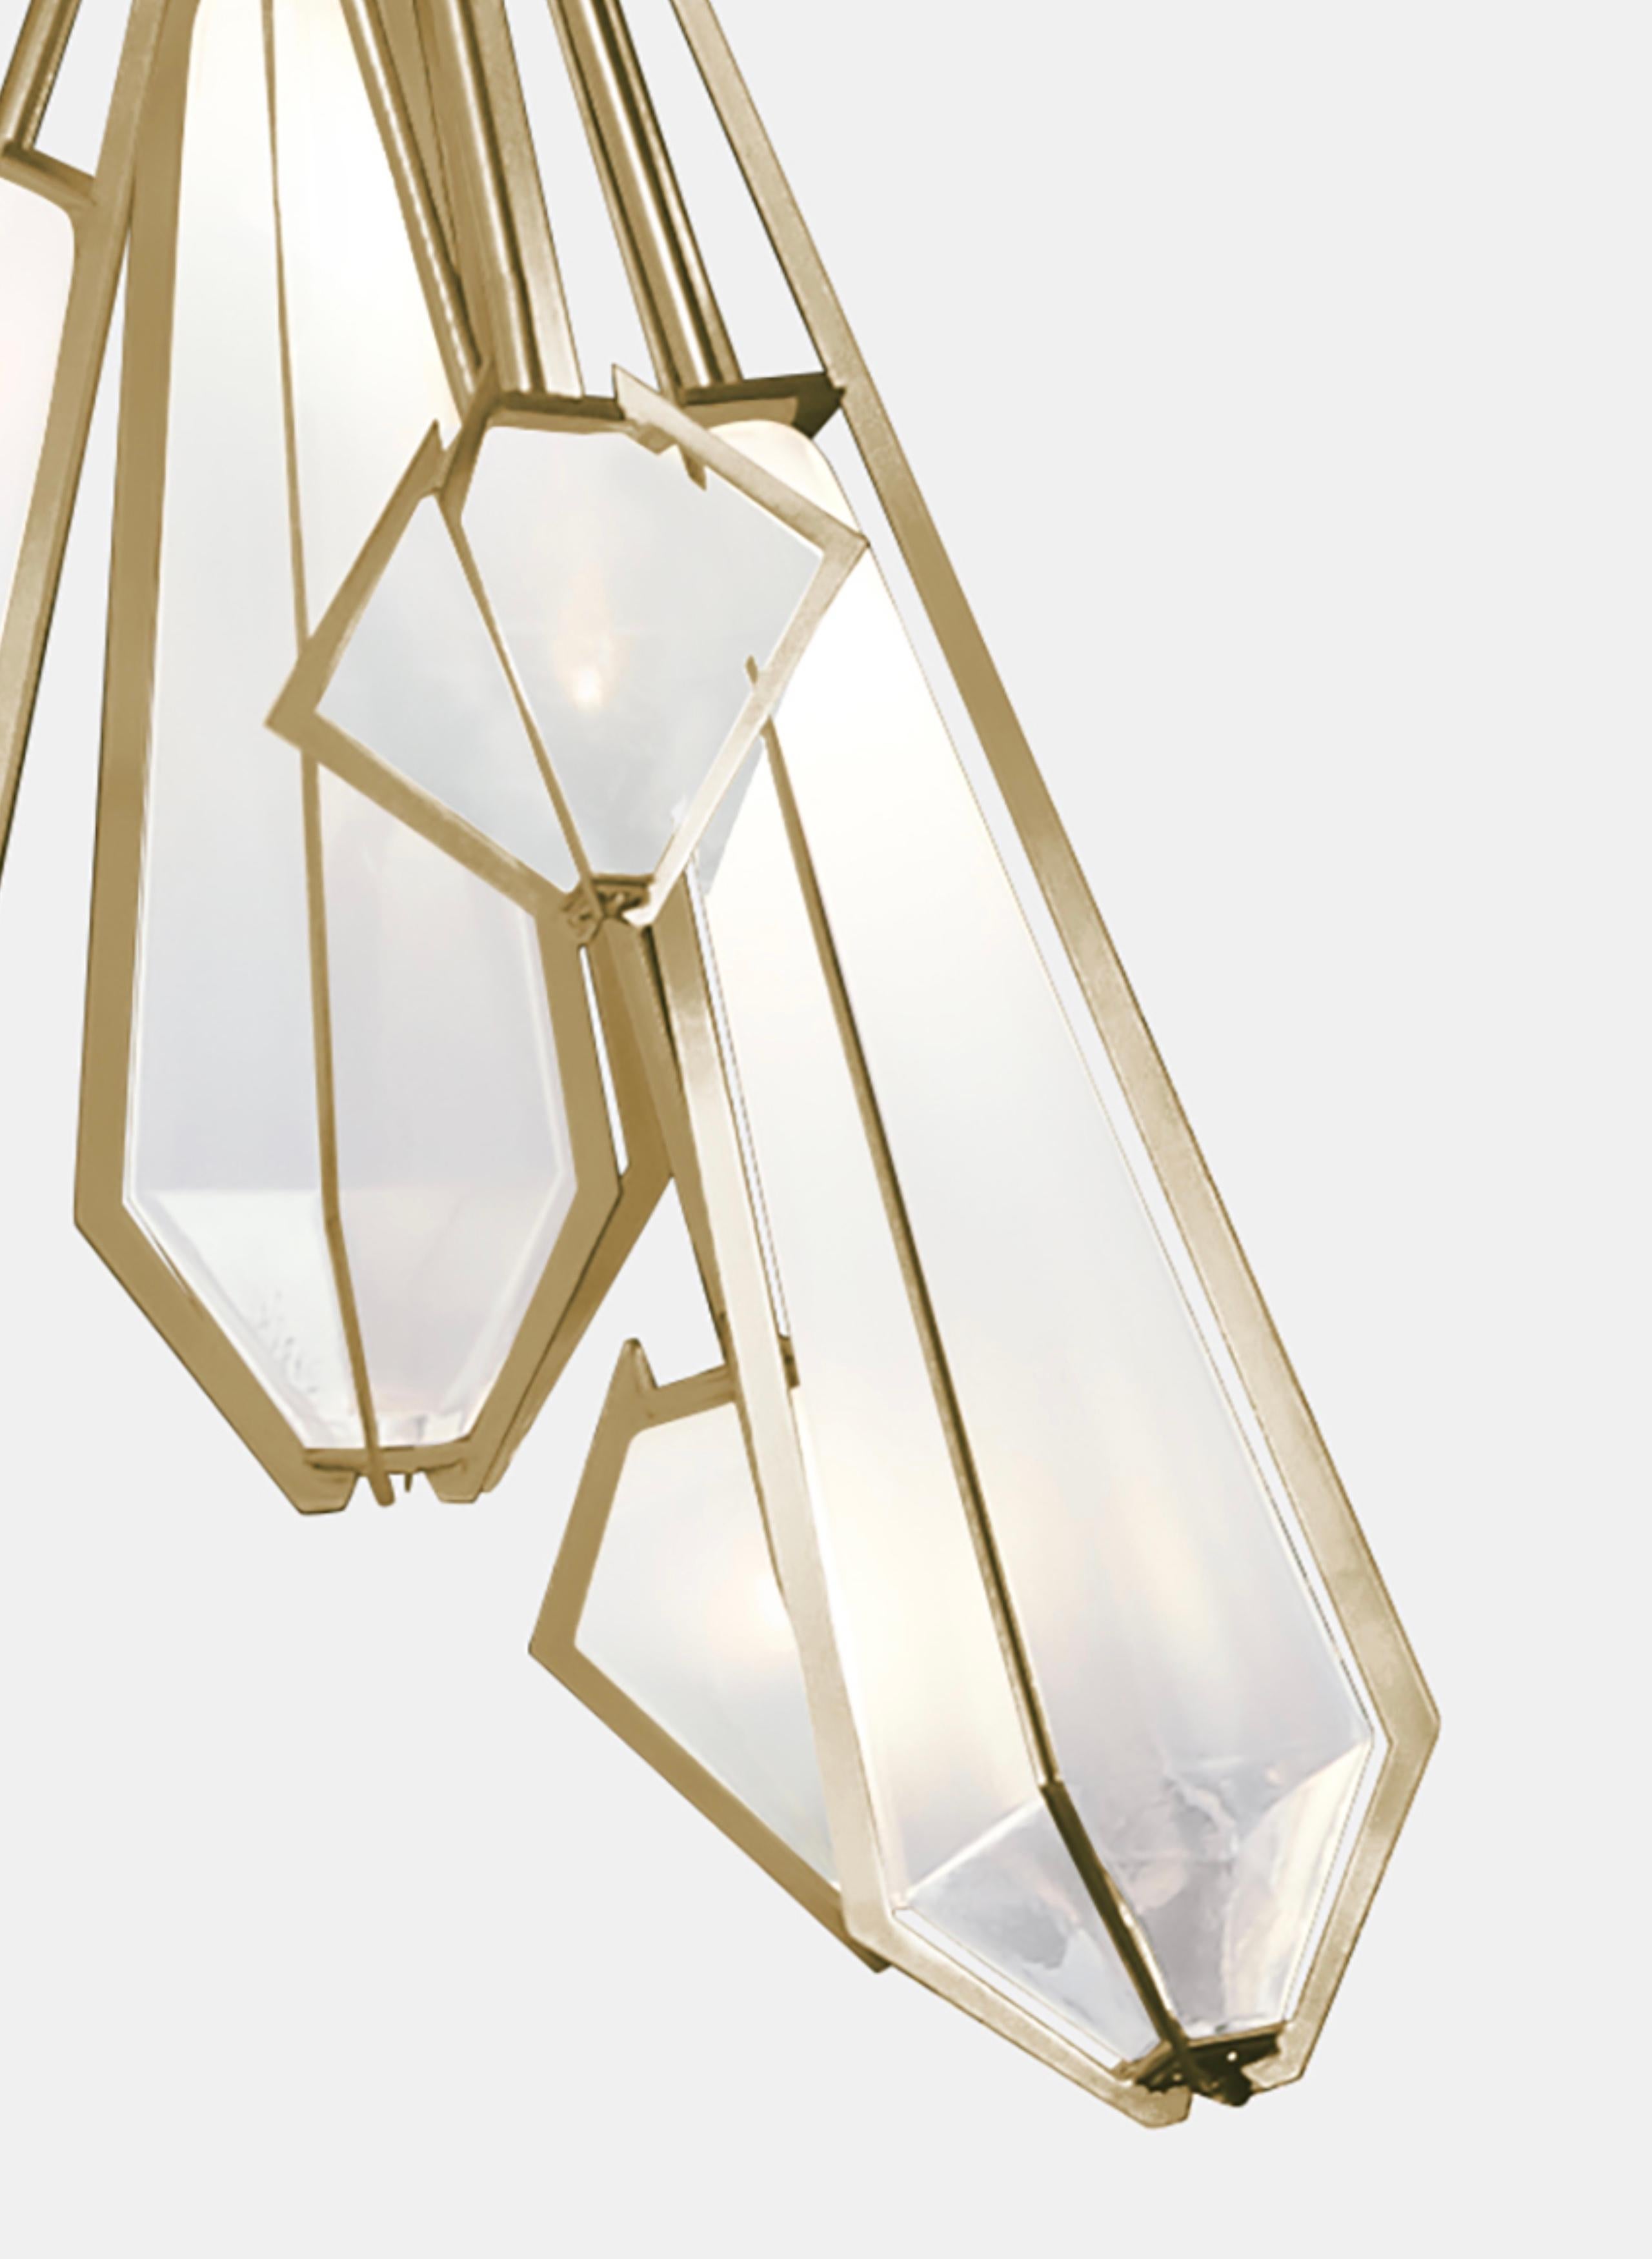 The Harlow Dried Flowers Chandelier offers an elegant starburst of light that reflects and refracts through its mold-blown glass shade. A sparkling prism, the Harlow Dried Flowers Chandelier is directly inspired by the world of jewelry with its